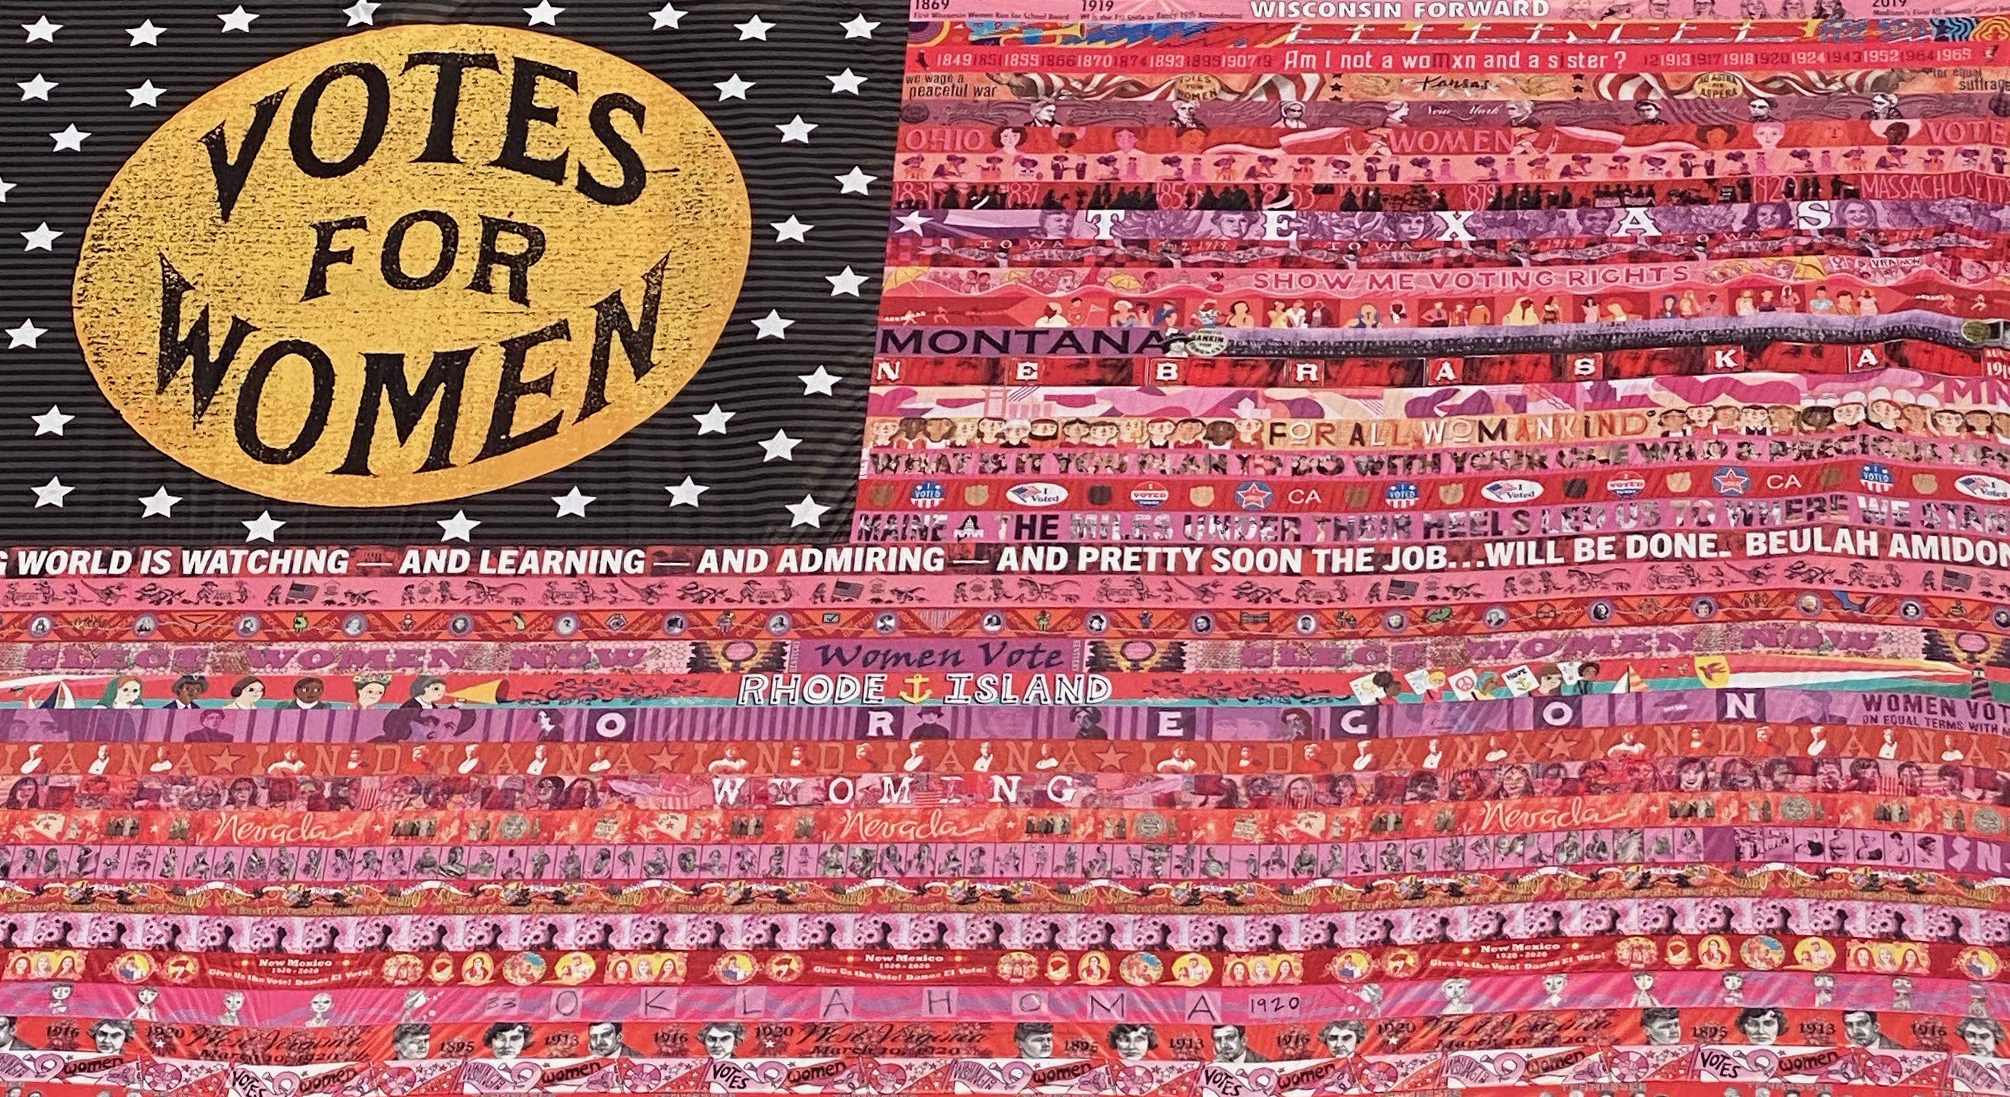 An artwork resembling the American flag. Instead of the stars on blue there is a large golden sign on black, reading "Votes for Women." Instead of the red stripes there are red and pink stripes with text and images of women's faces.